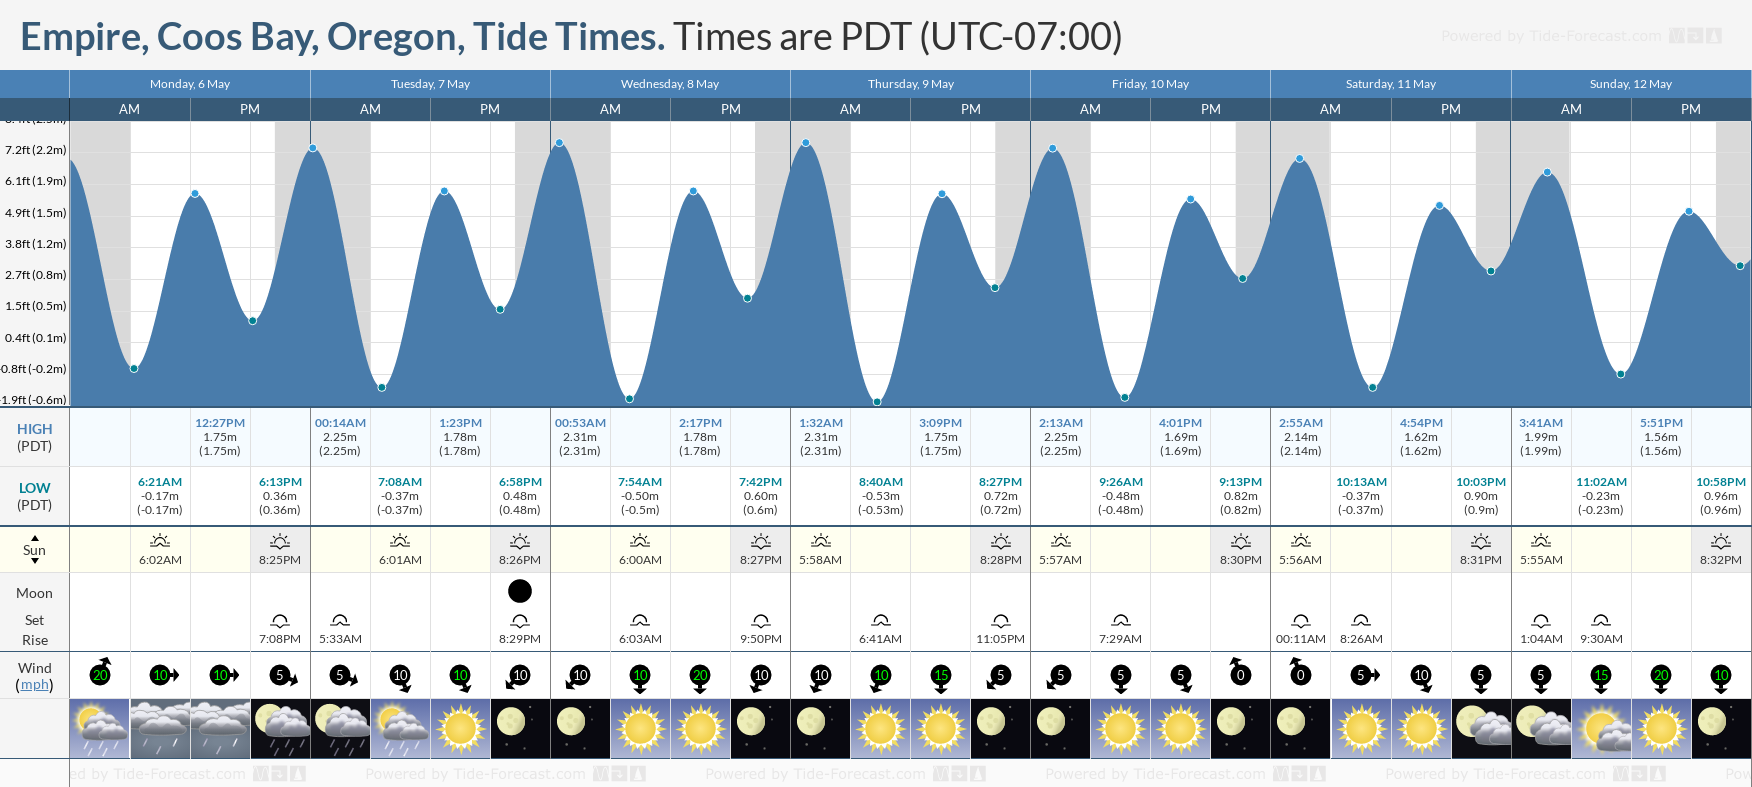 Empire, Coos Bay, Oregon Tide Chart including high and low tide times for the next 7 days